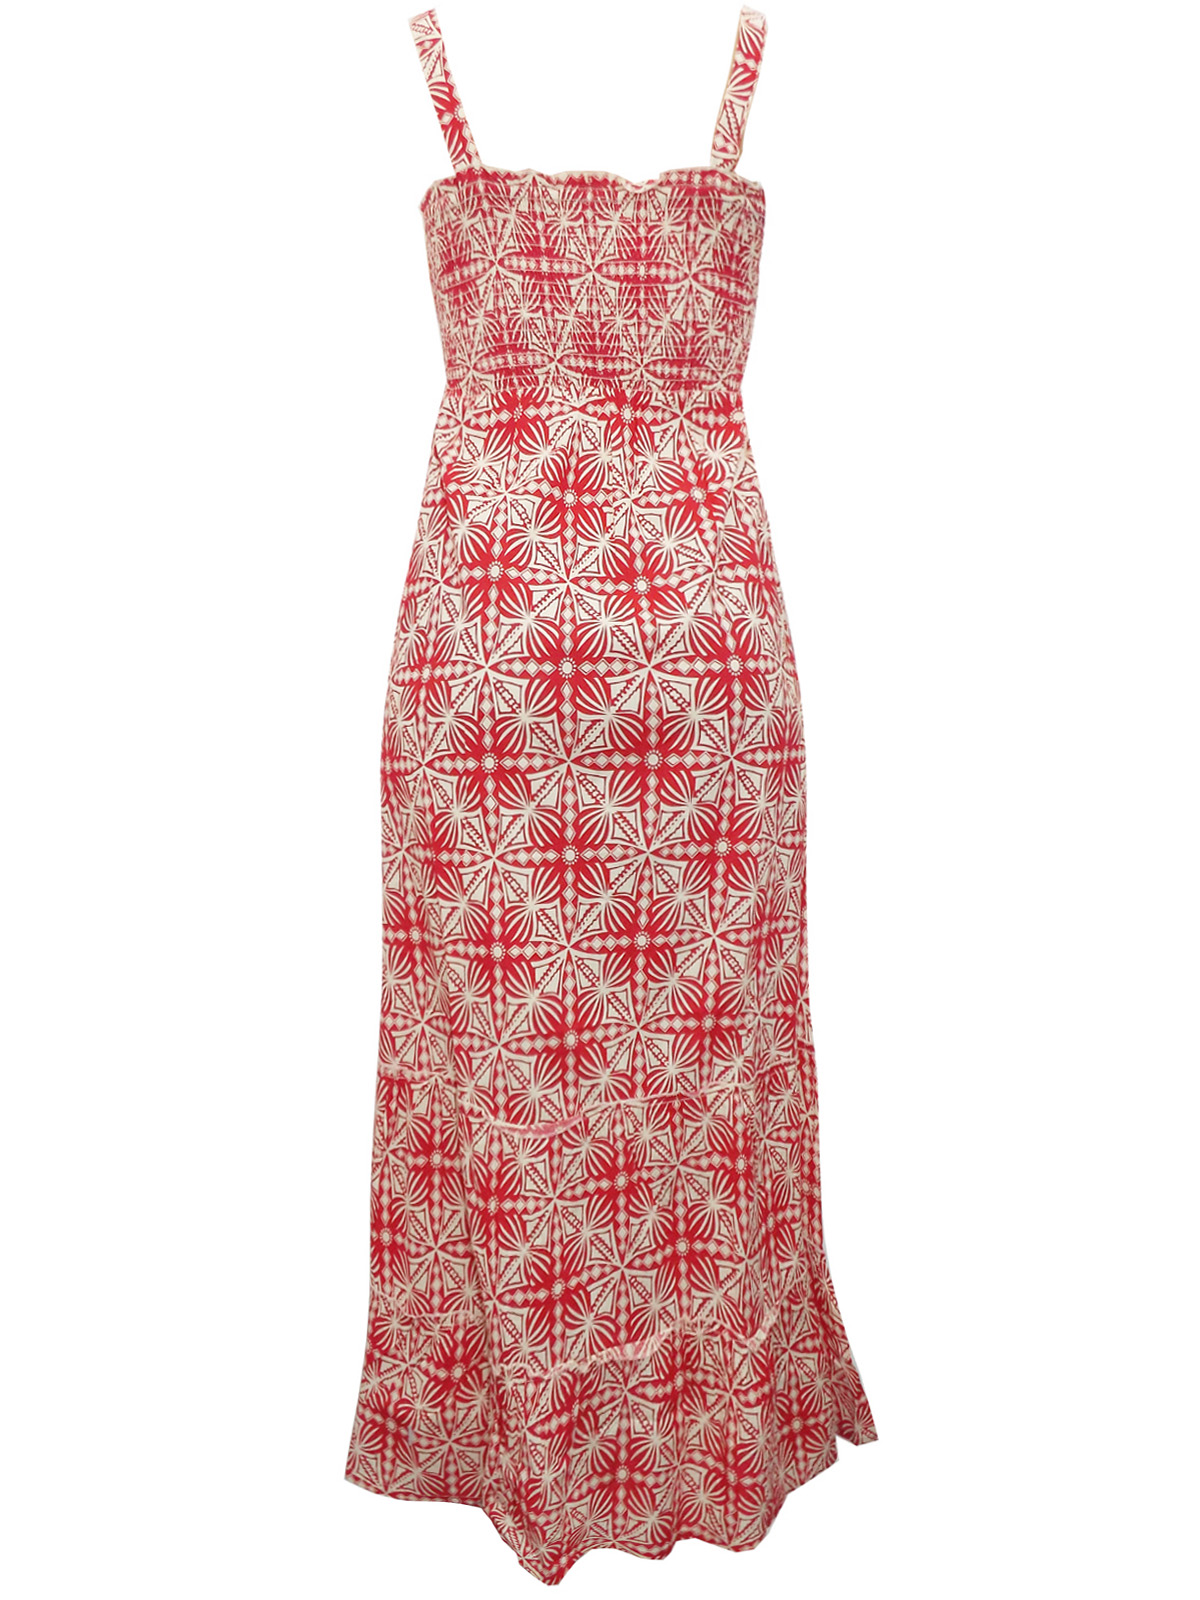 RED Pure Cotton Printed Shirred Maxi Dress - Plus Size 14/16 to 22/24